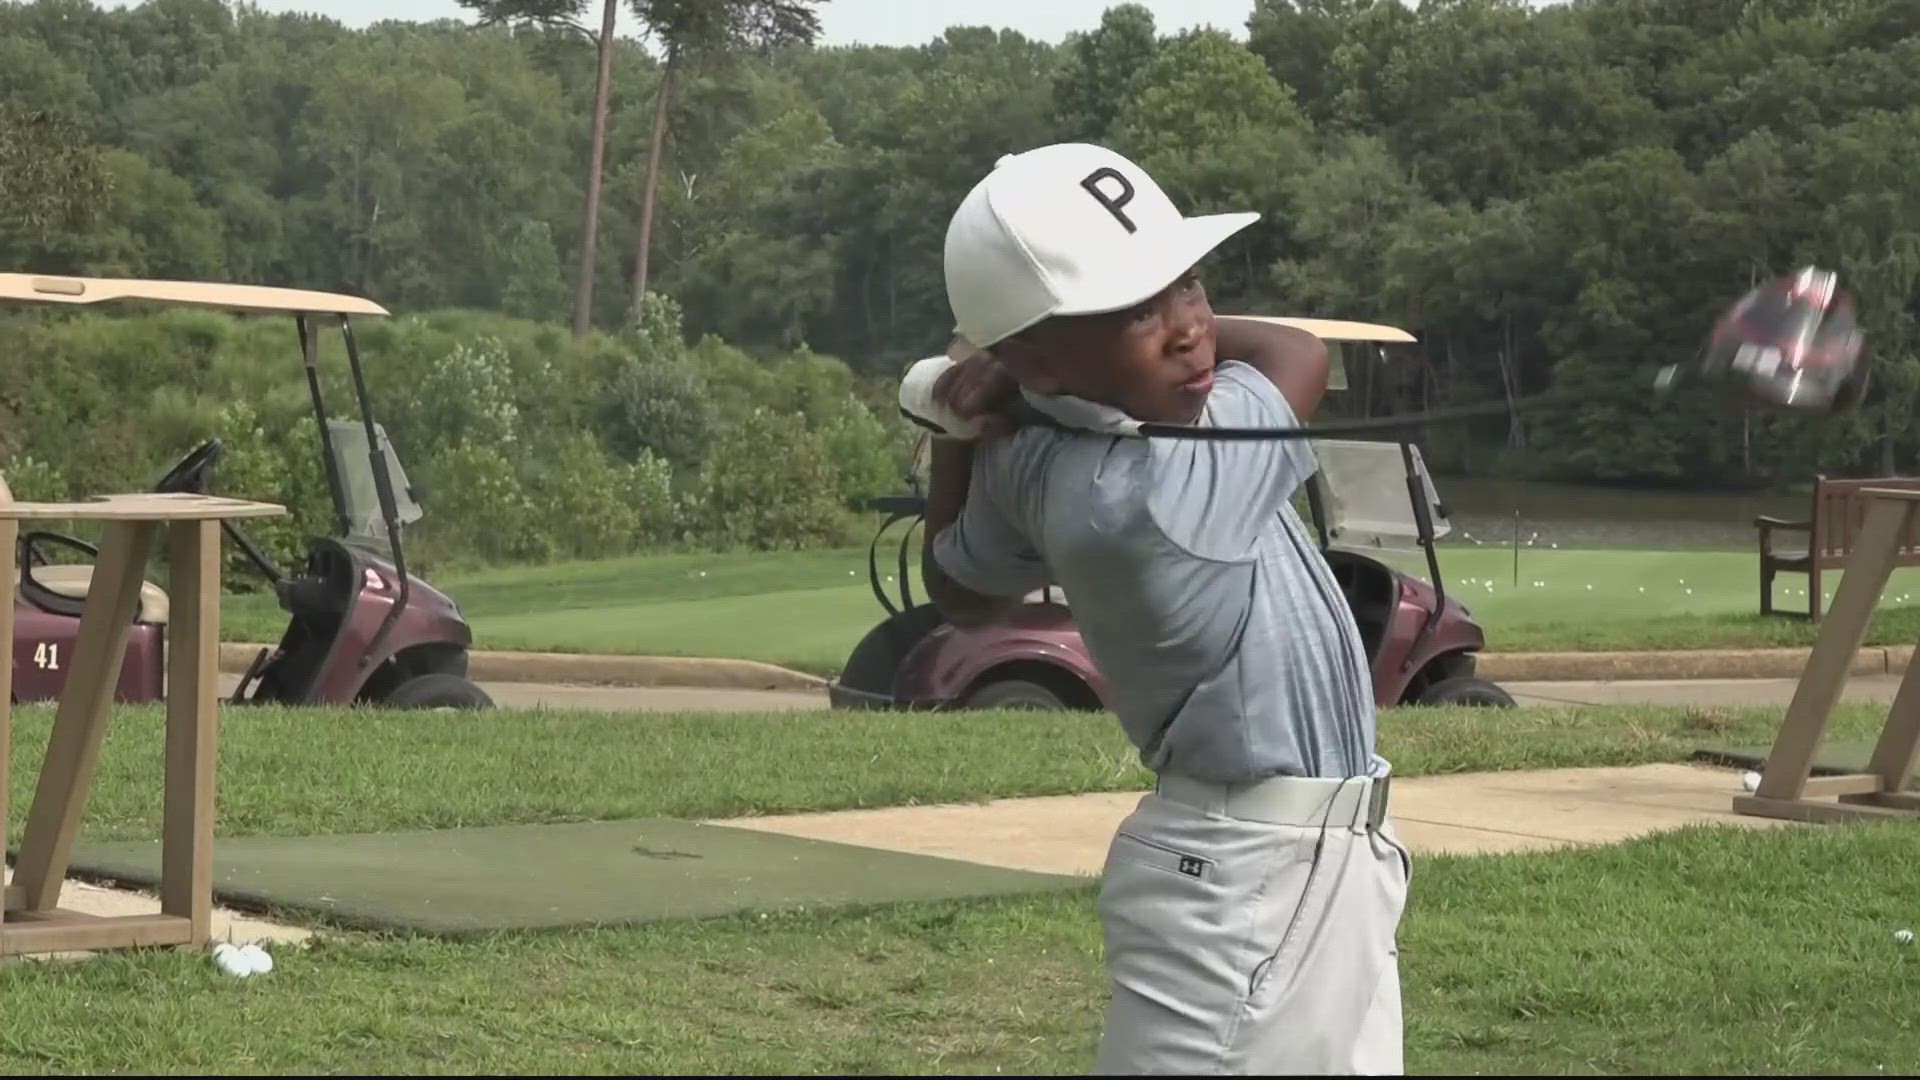 The second annual Black golfers' weekend in Prince George's County is just days away. The event is all about increasing minority participation in the sport.